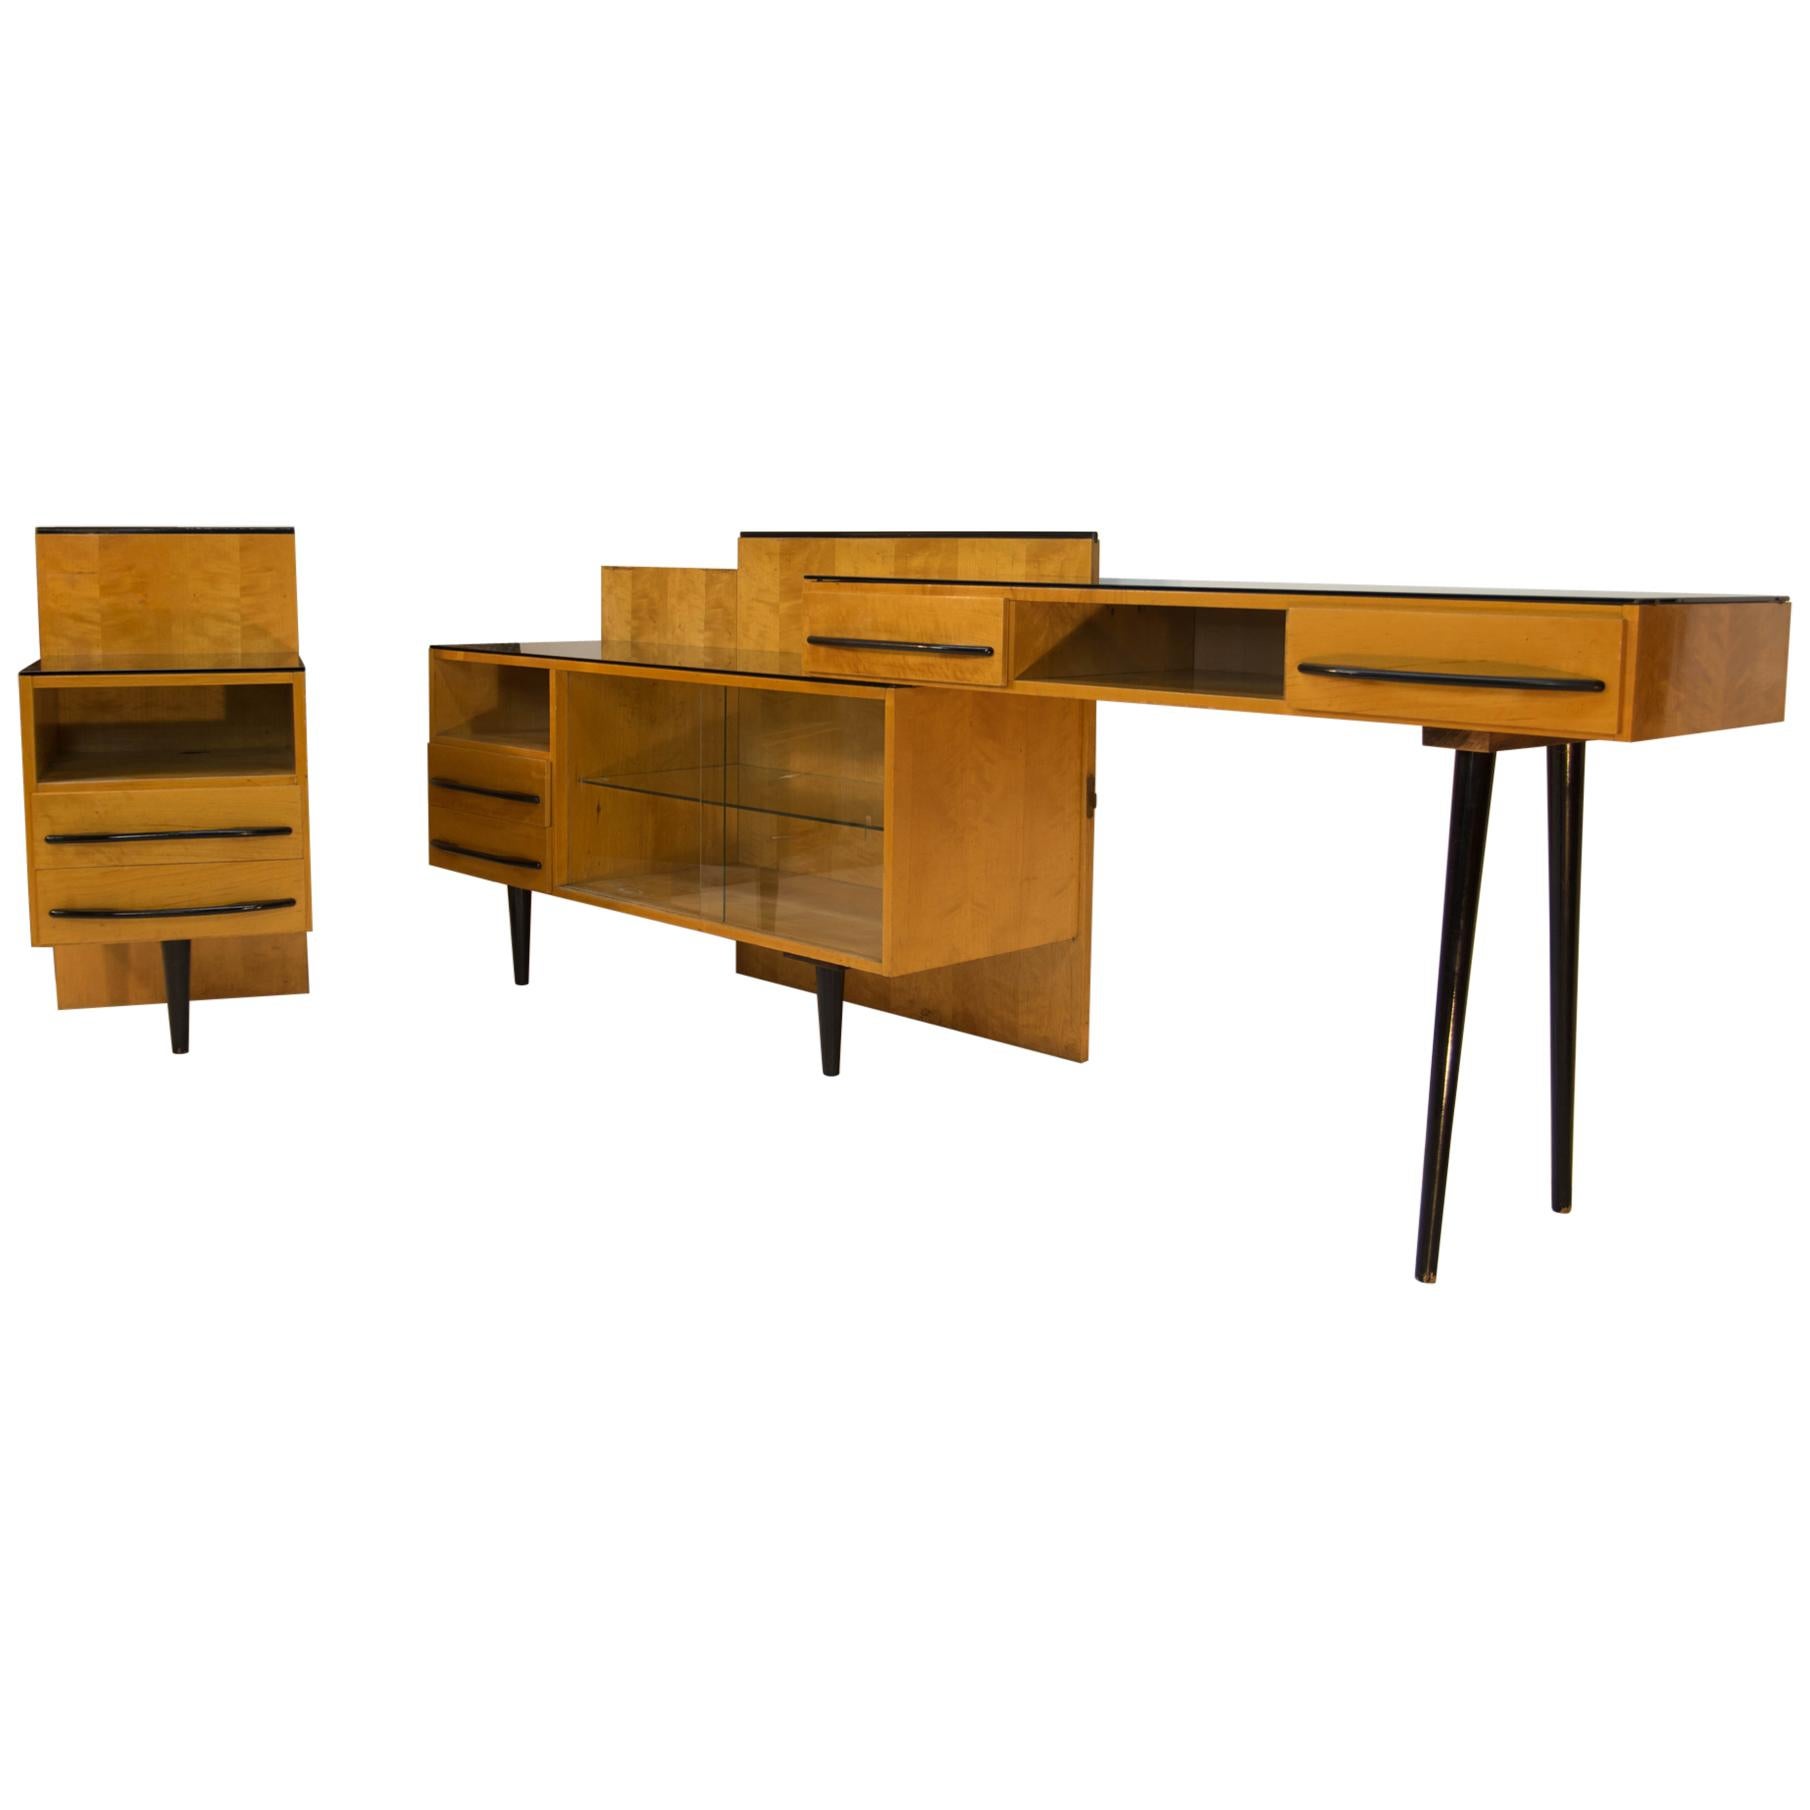 Modular Set of Table, Nightstand and Chest of Drawers by M. Pozar, 1960s